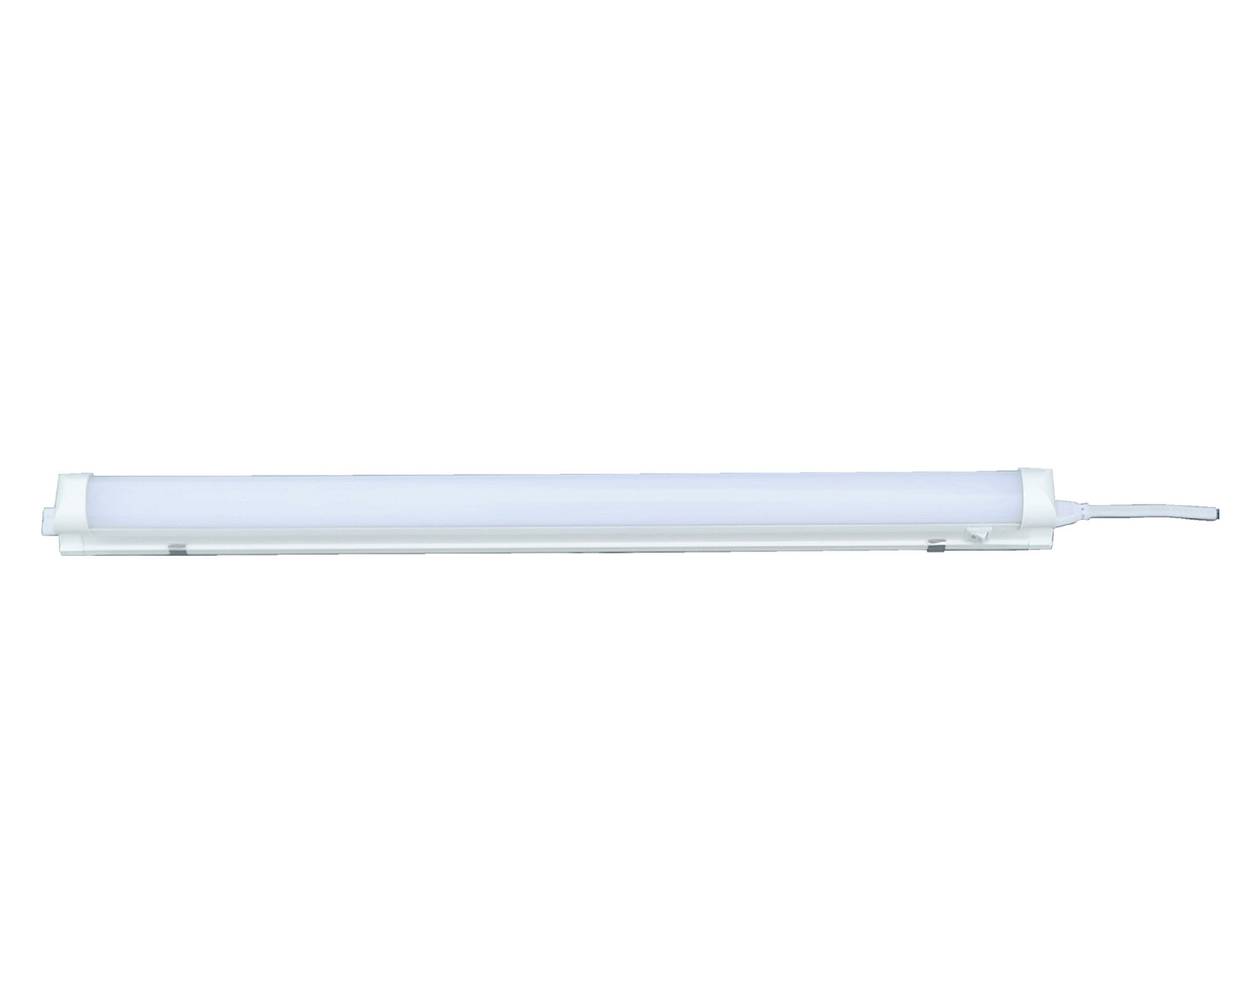 Byp equipo fluorescente led t8 blanco